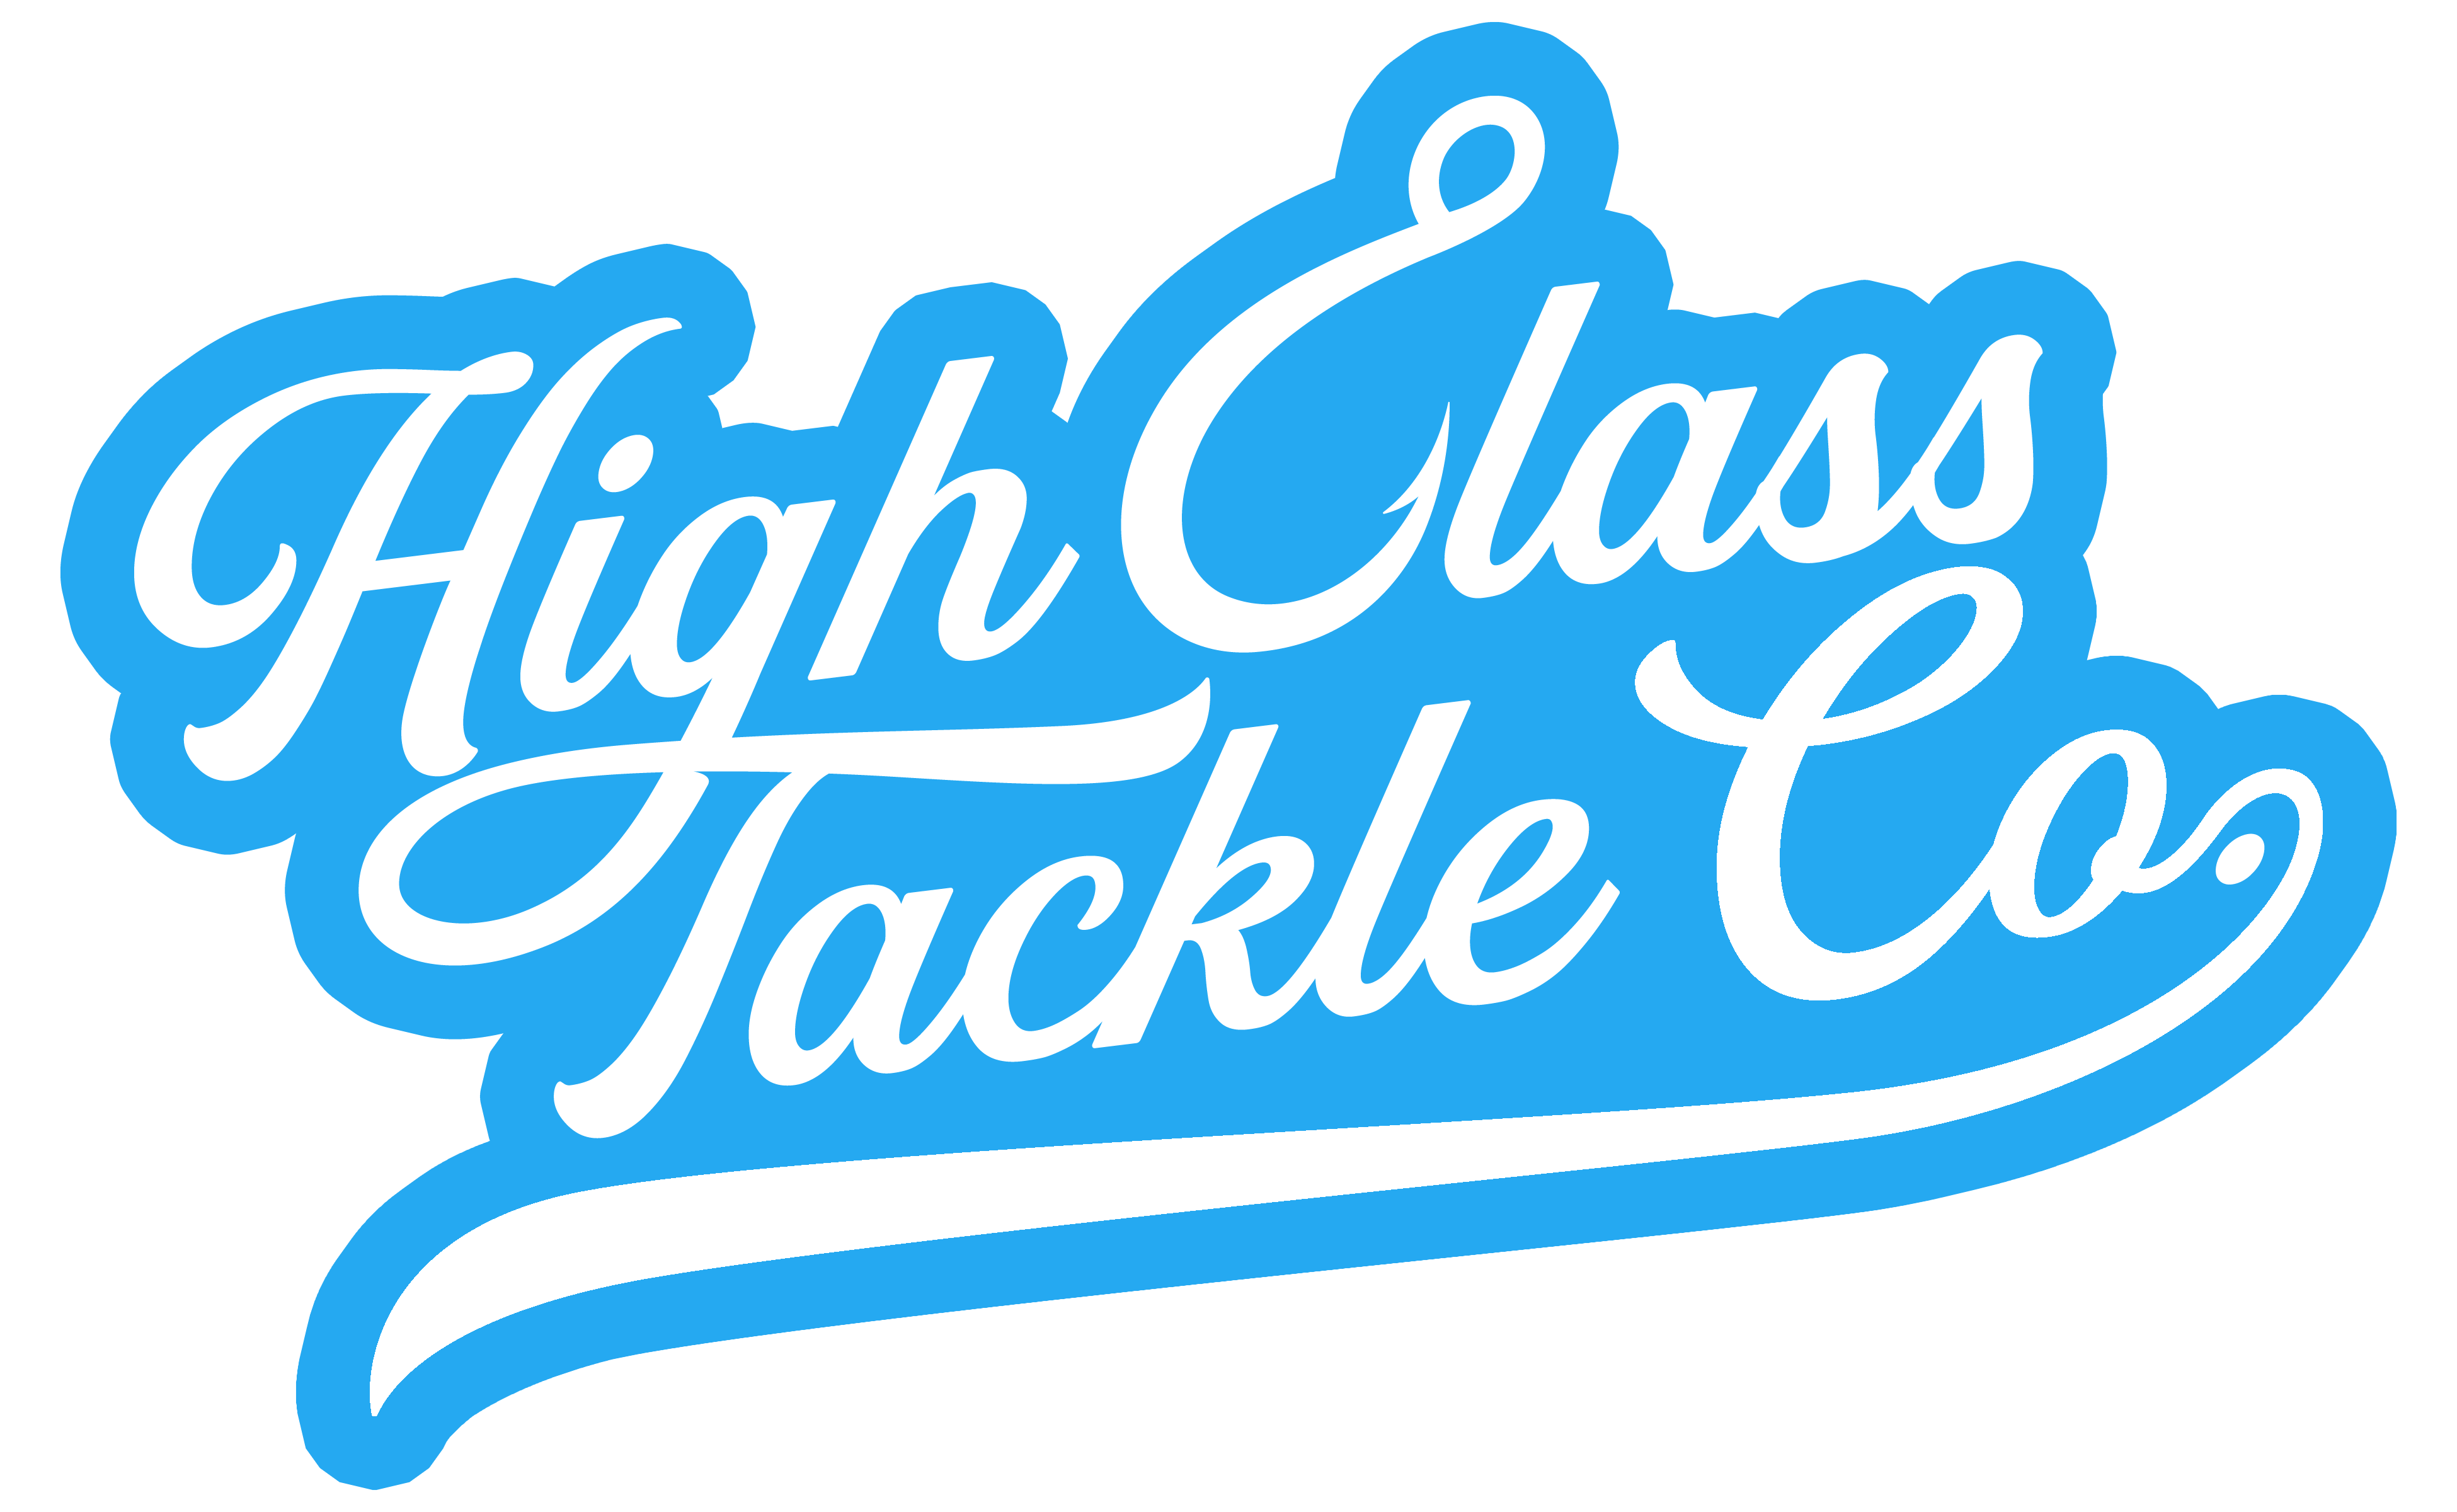 High Class Tackle Co. Boat Decal